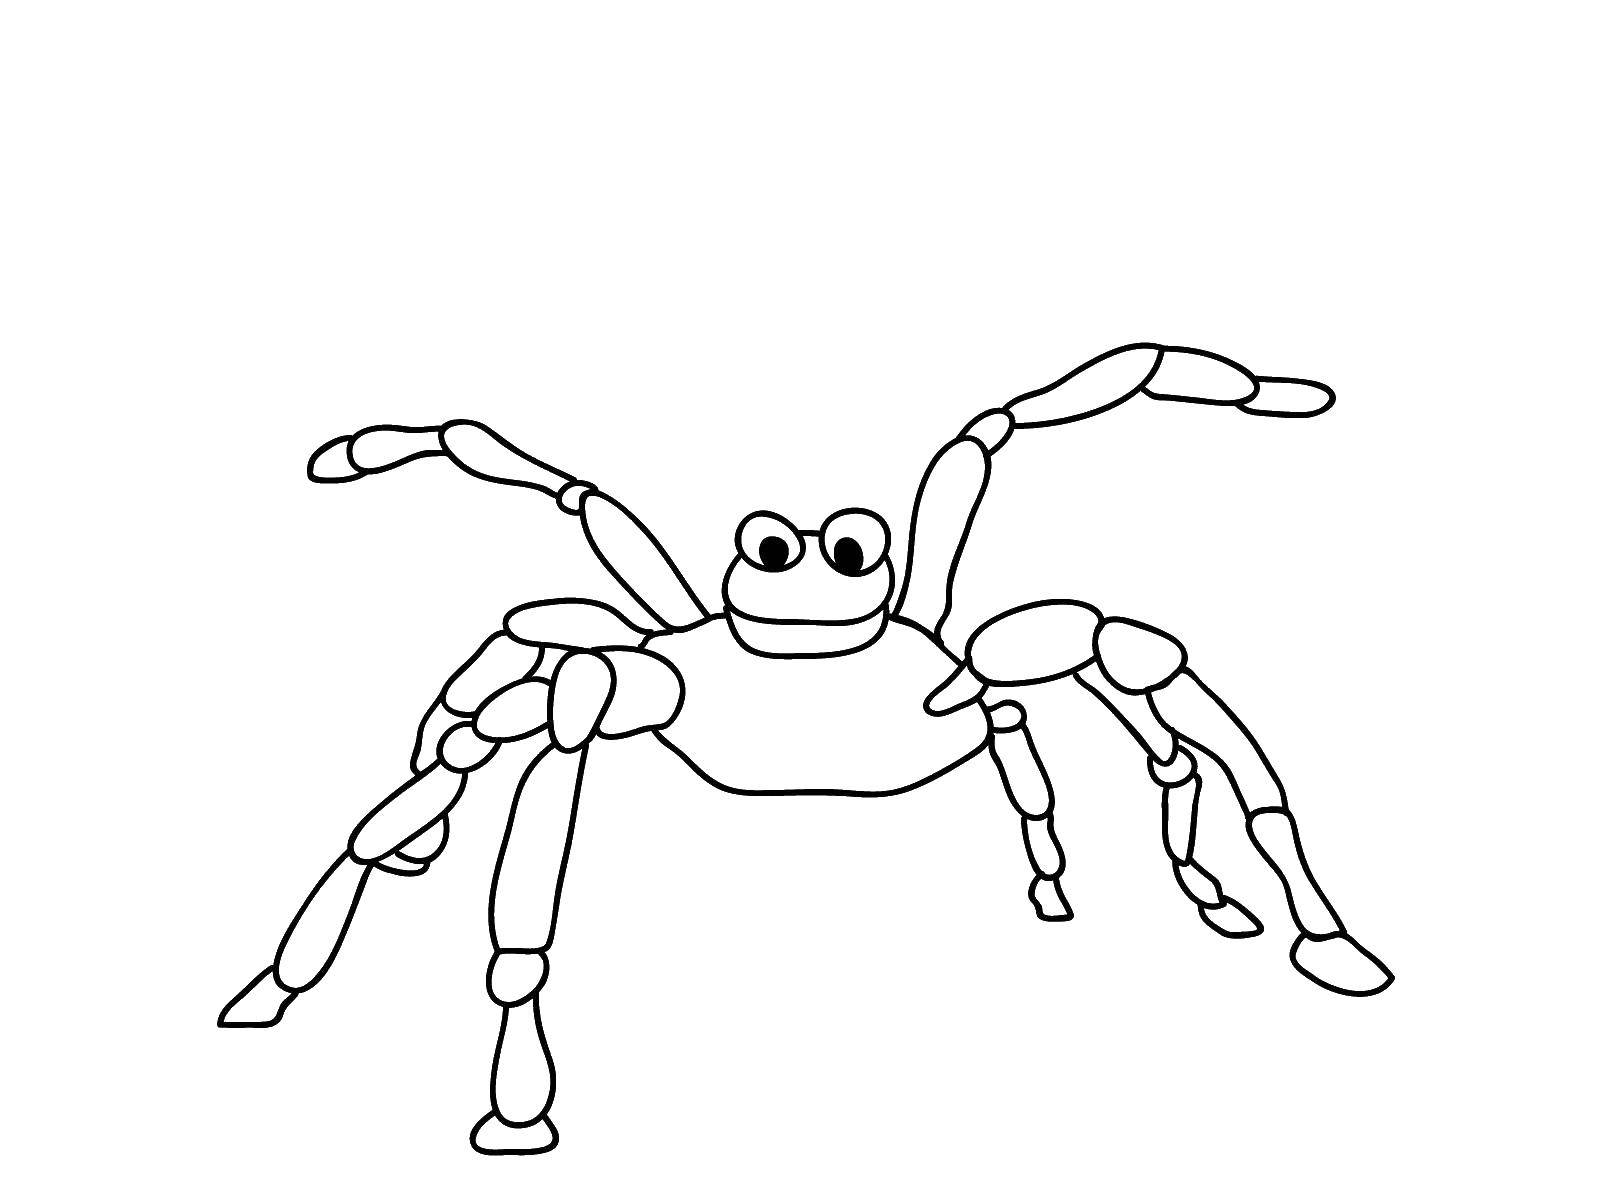 Coloring Spider. Category spiders. Tags:  spider, web, insect.